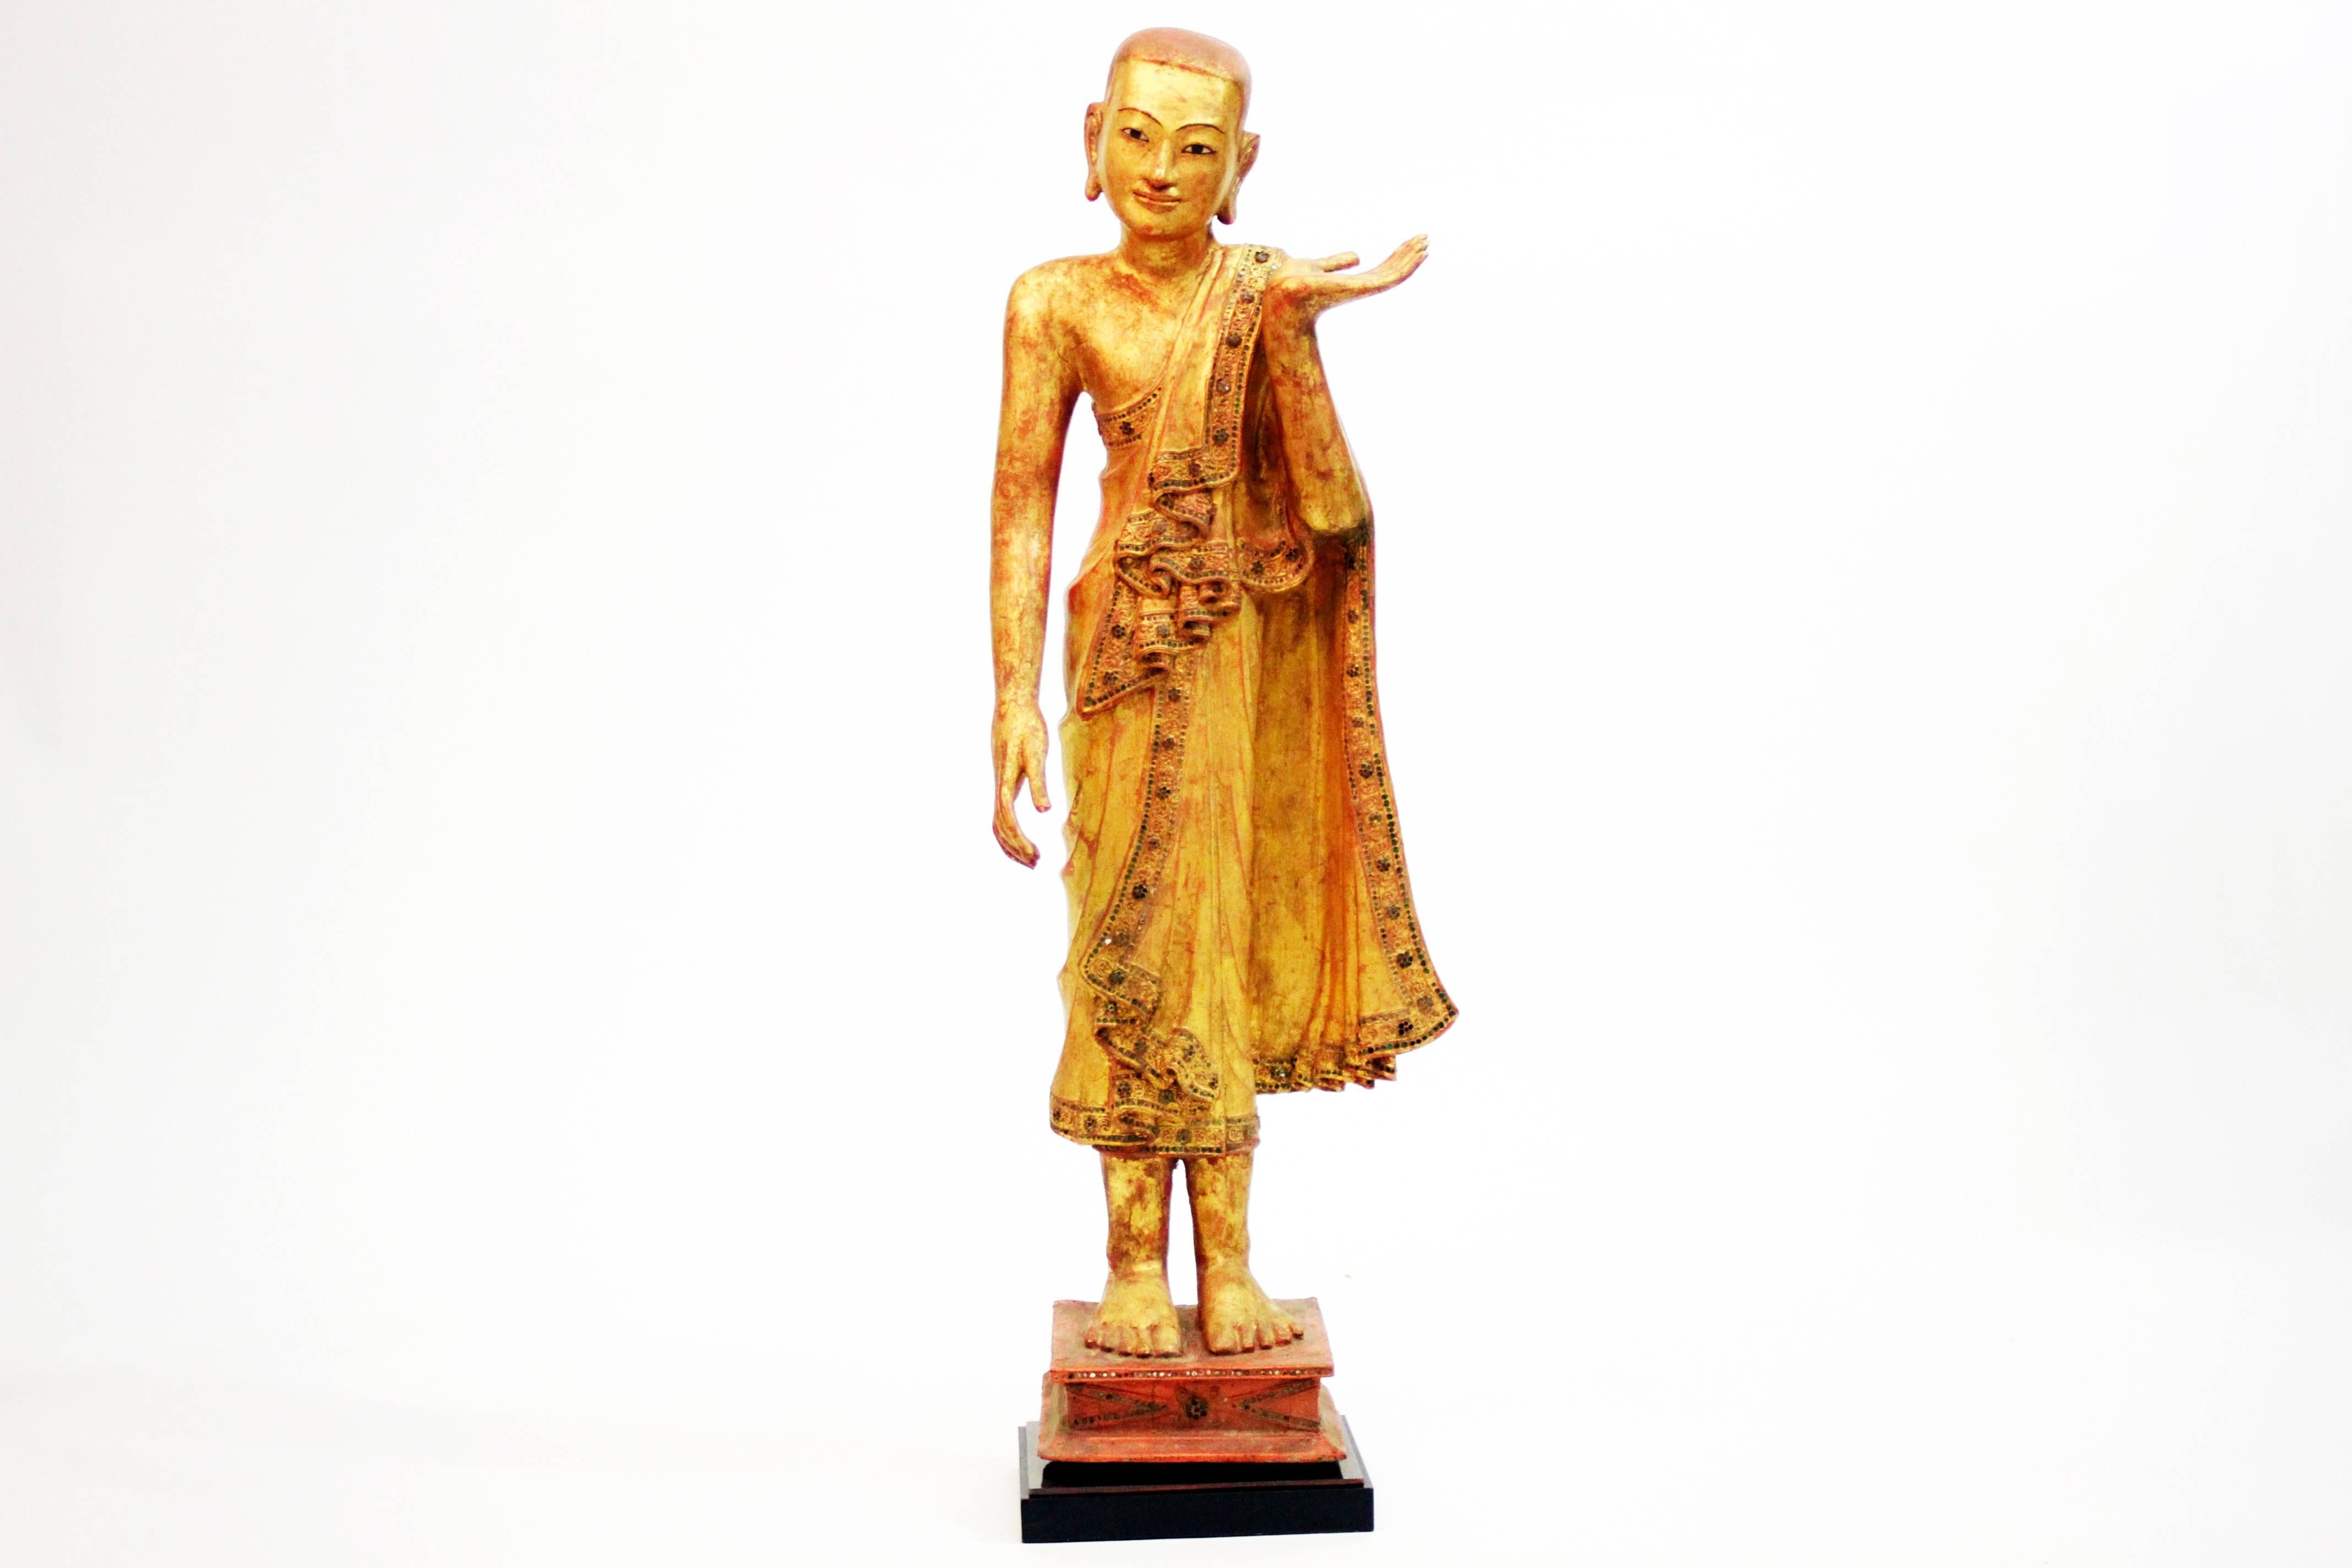 This impressive hand-carved Burmese Apostle is from Rangoon, Myanmar early 19th century and is made from gold leaf and lacquer over teakwood.